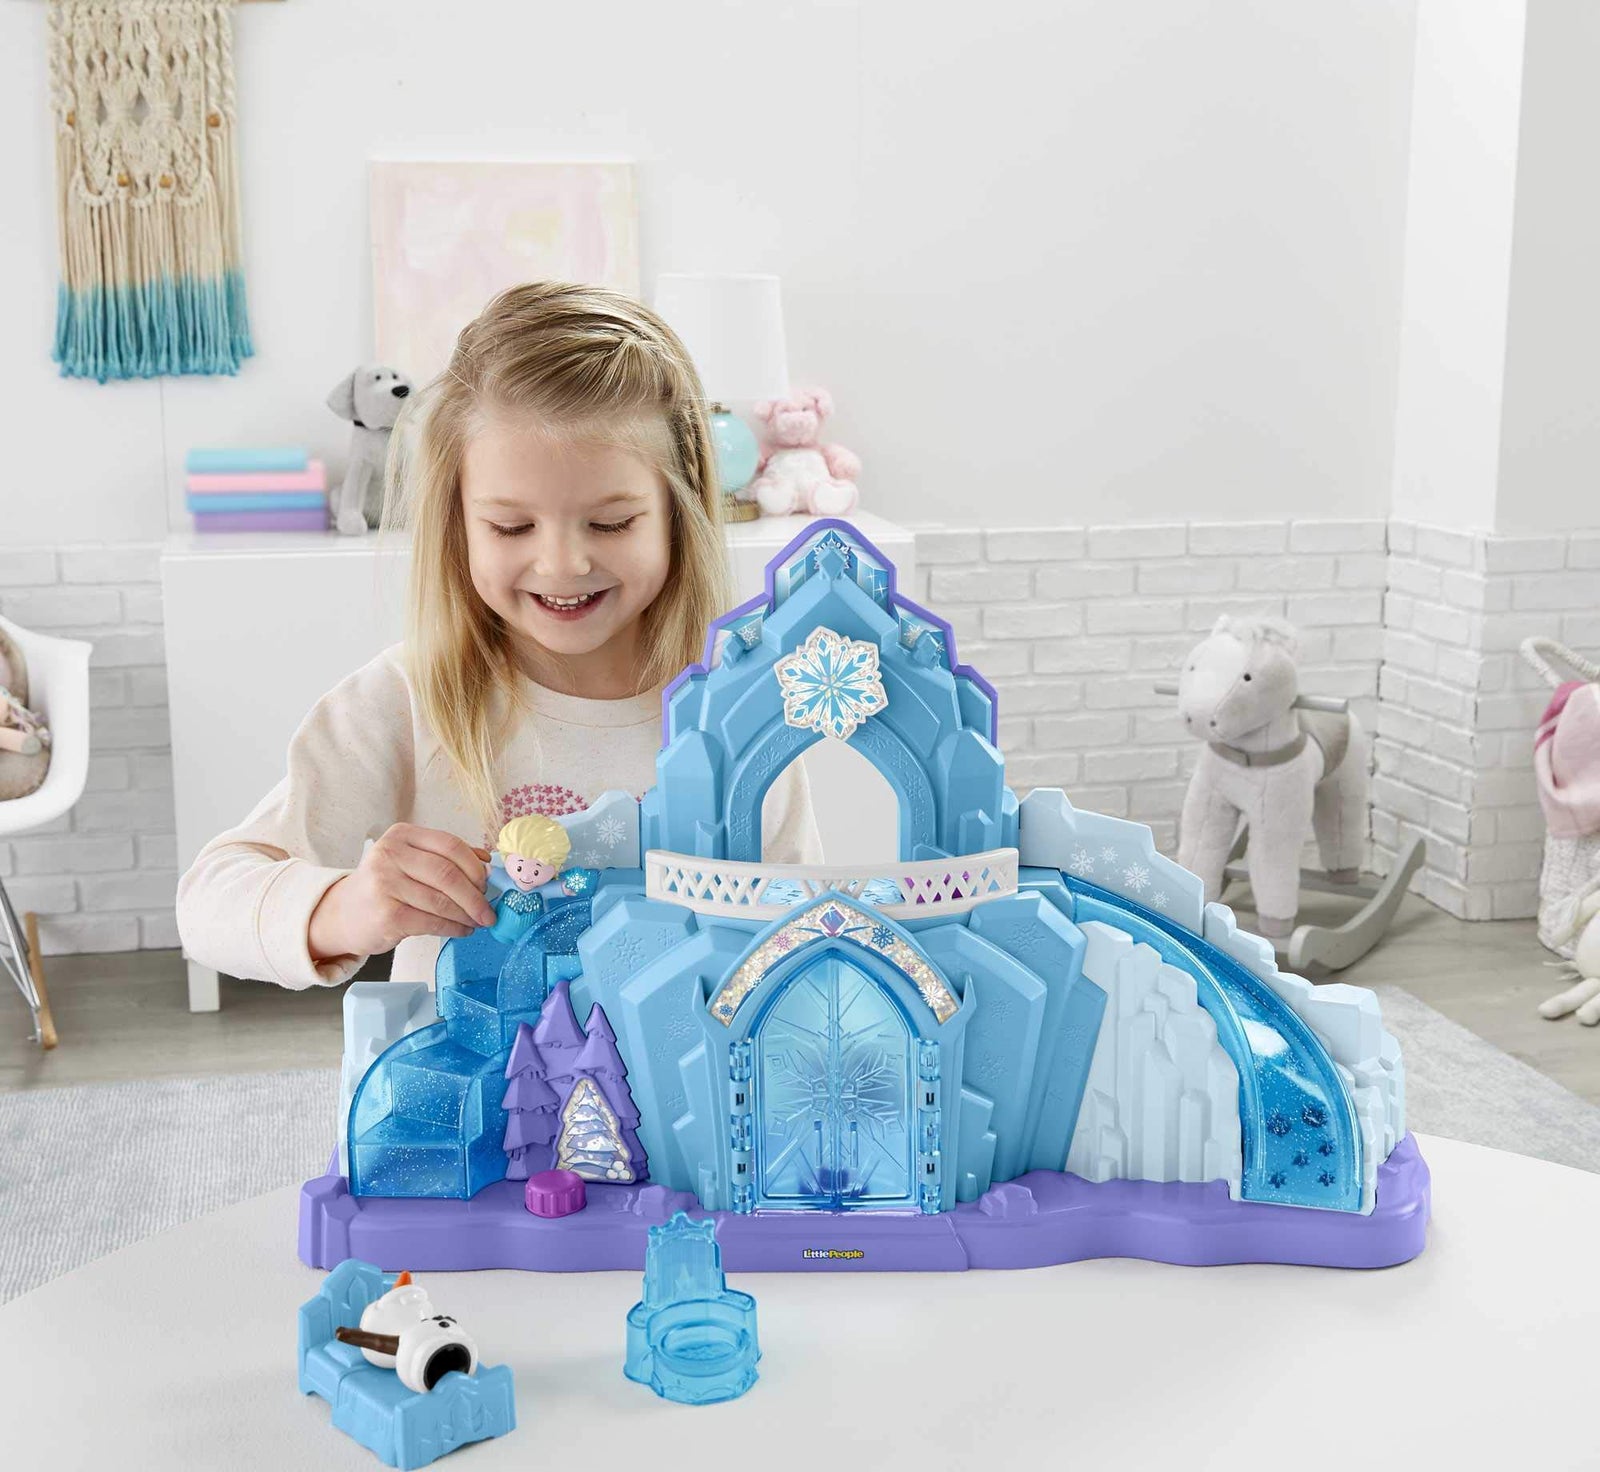 Disney Frozen Elsa's Ice Palace by Little People, Musical Light-Up Playset Featuring Elsa and Olaf, Dazzling Lights, Sounds, and the Hit Song, "Let It Go"!